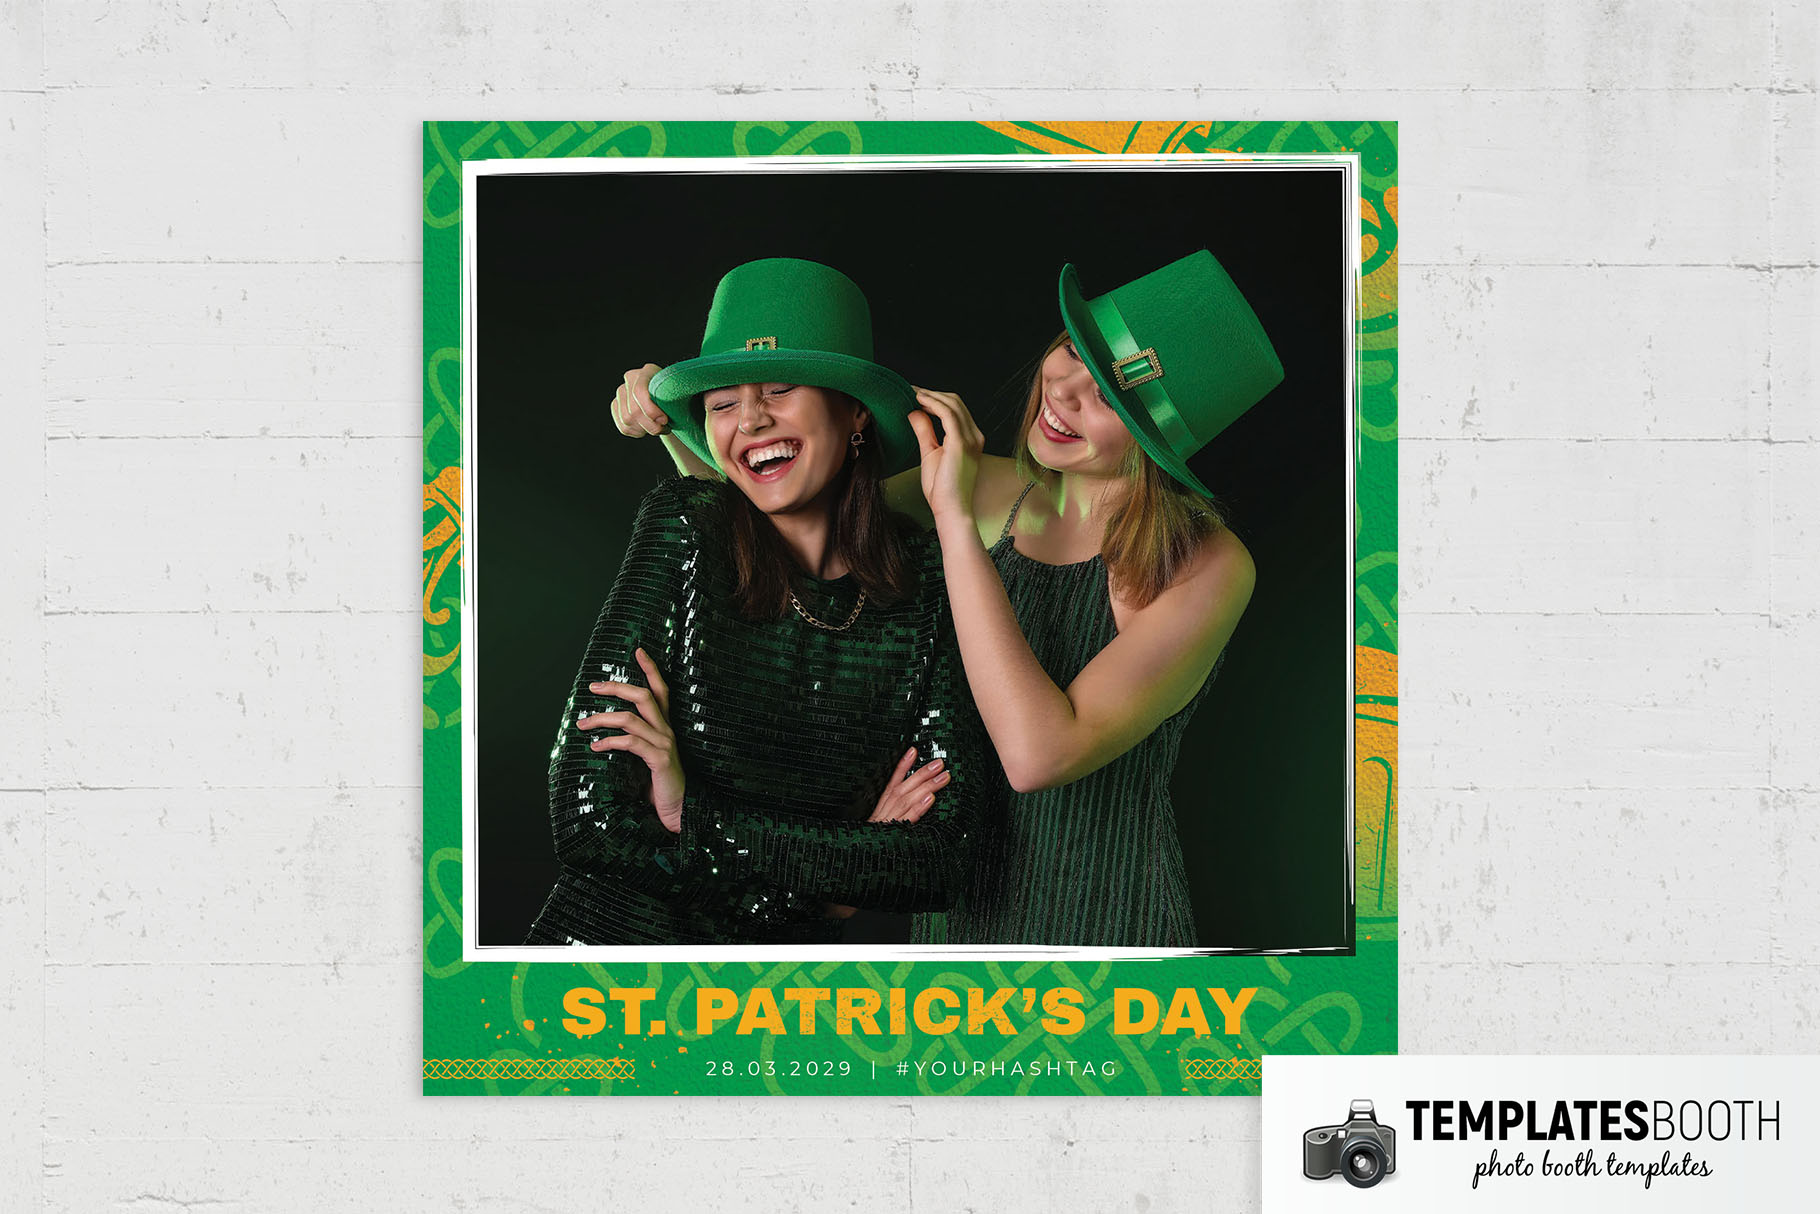 St. Patrick’s Day Photo Booth Template